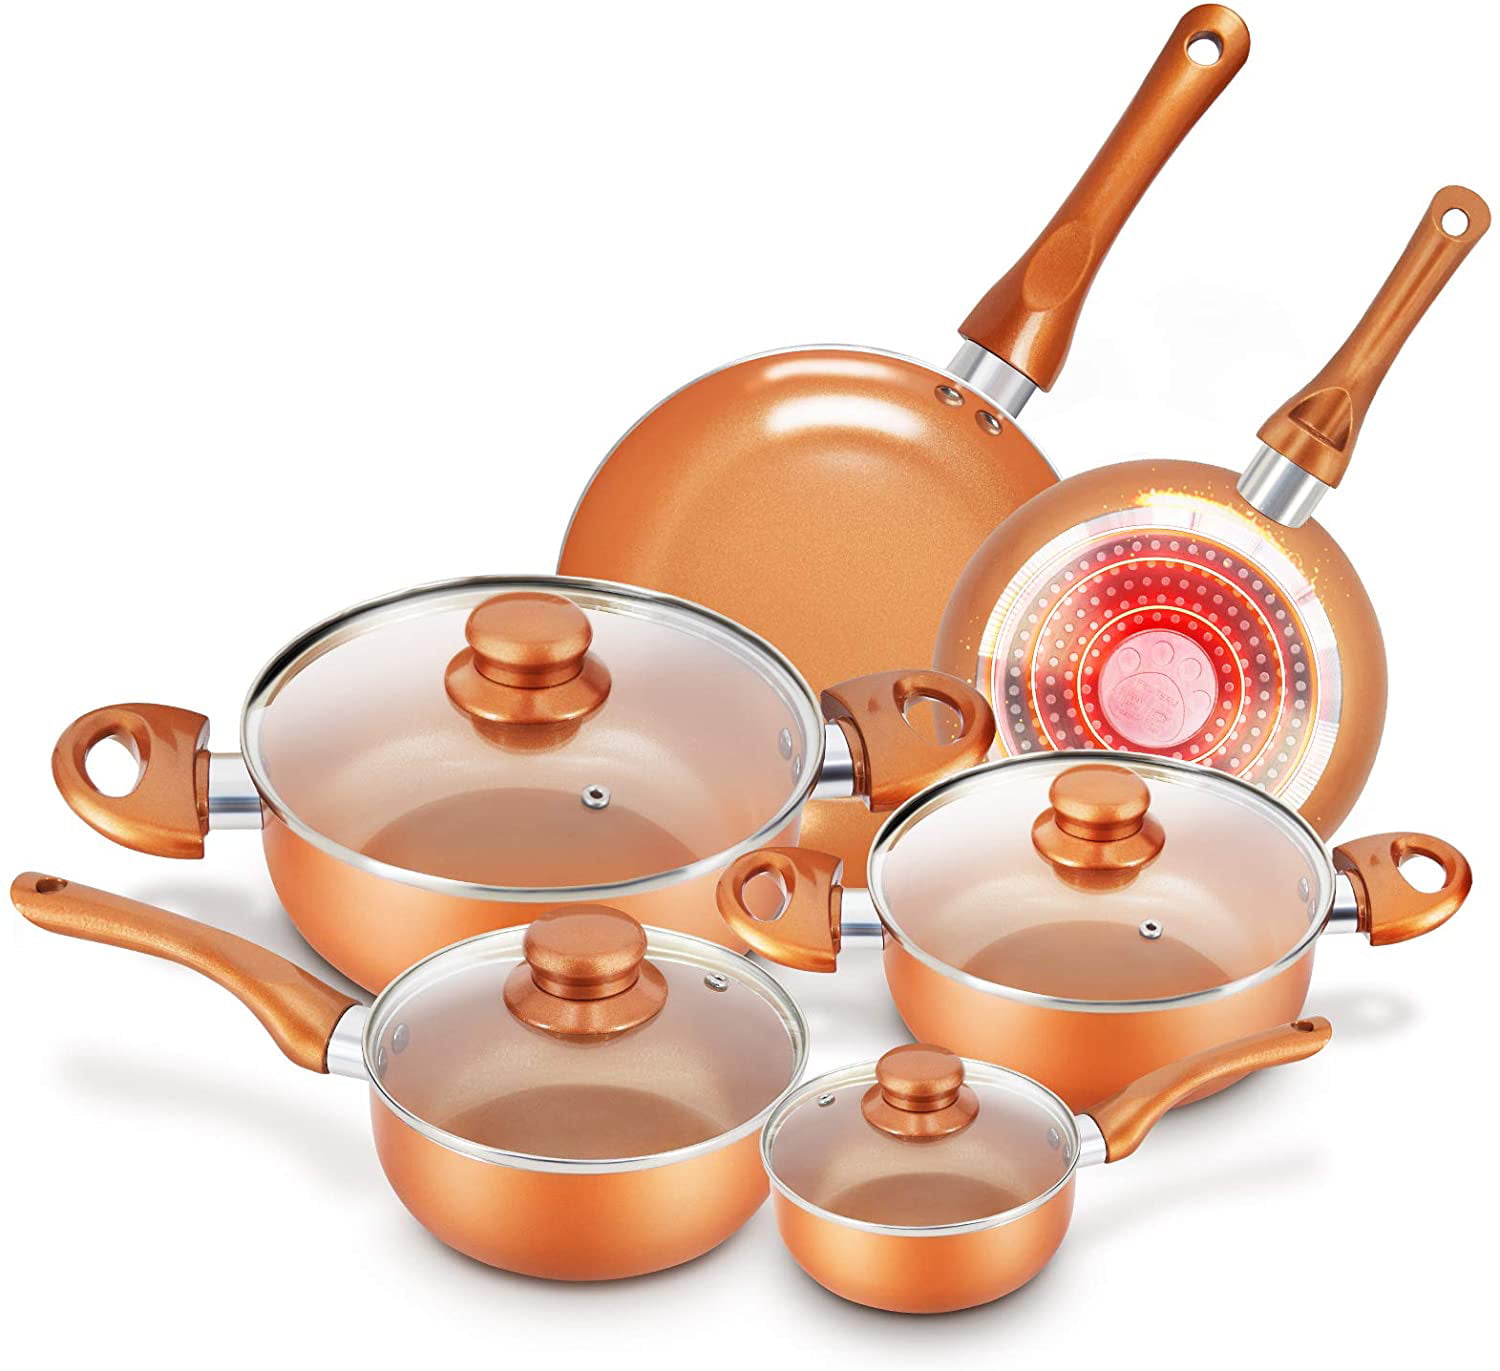 Cookware Set for Gas 7in Milk Pot with Lid 8/11in Fry Pans 1 Year Warranty KI Pots and Pans Set Ceramic Non-Stick Free Gift 1 Pancake Turner